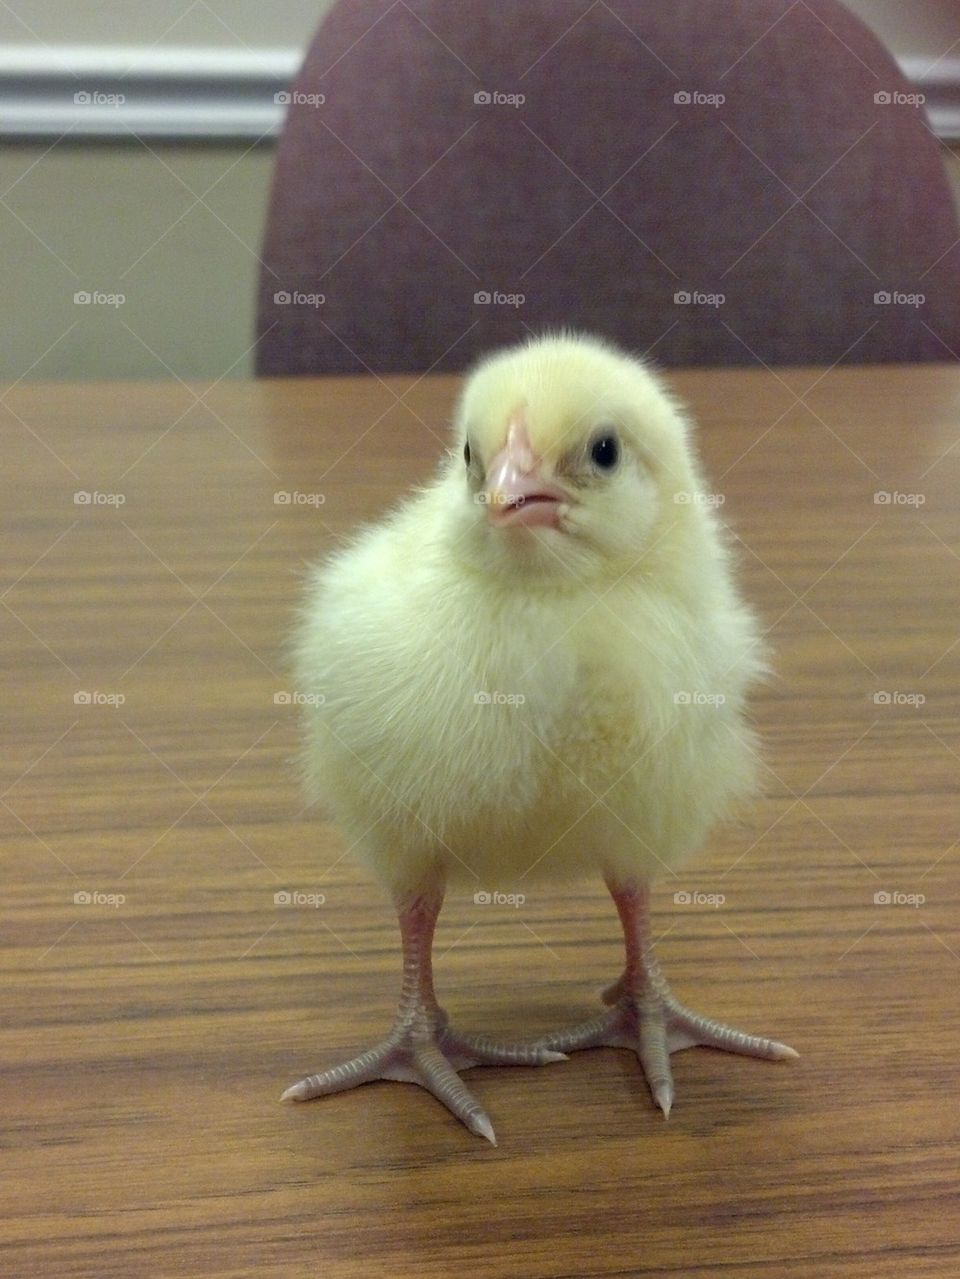 Baby chick on table